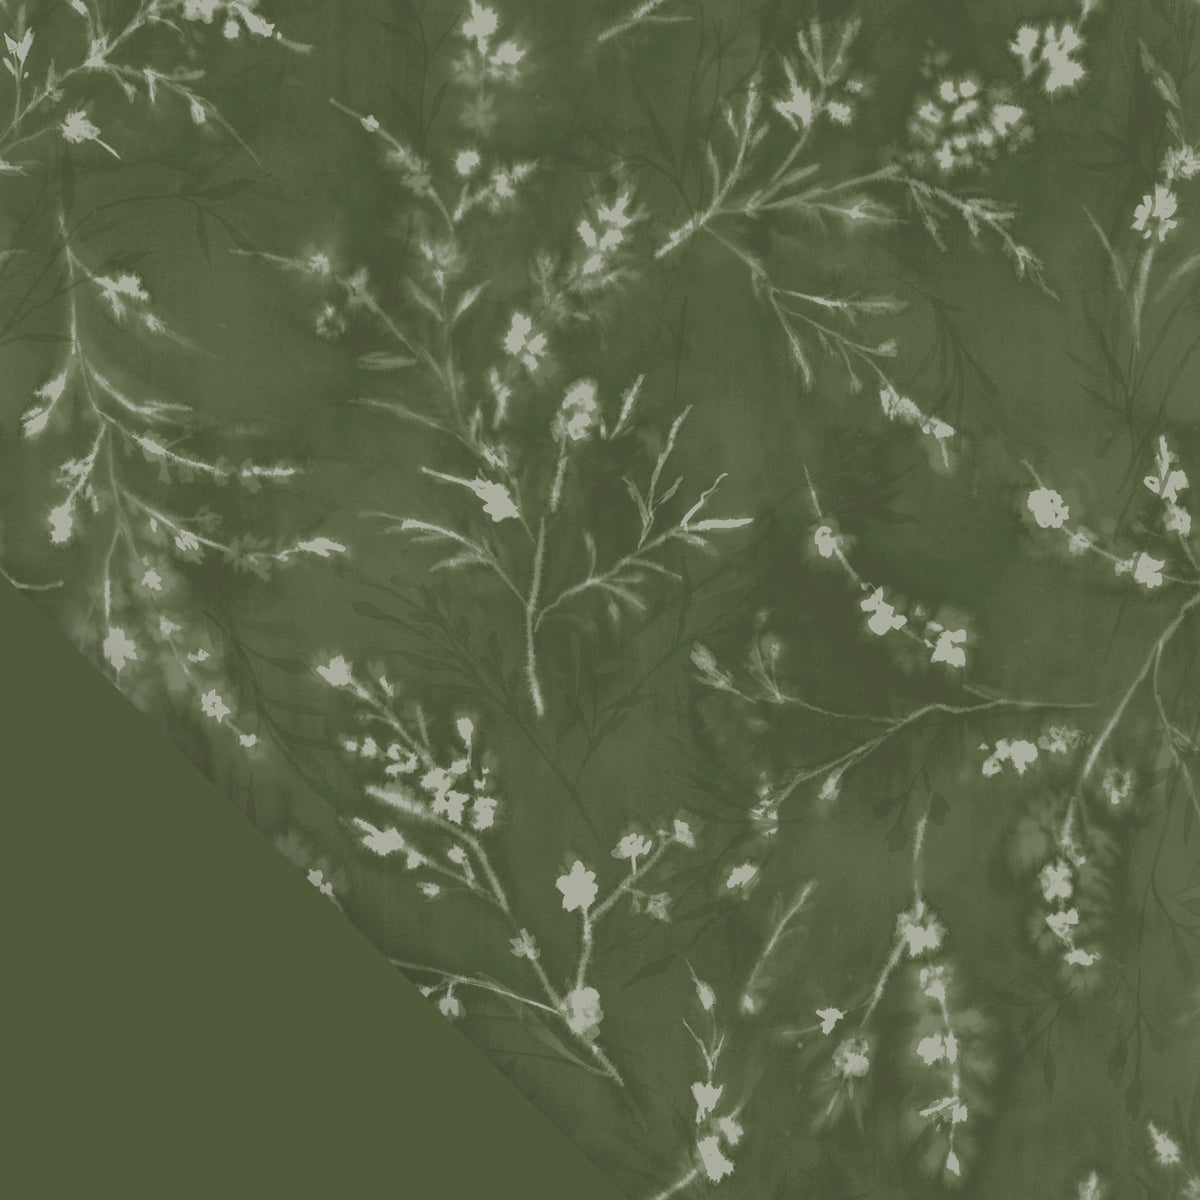 Close-up image of the Floral Evergreen pattern with a small section of the plain Evergreen color in the bottom left corner